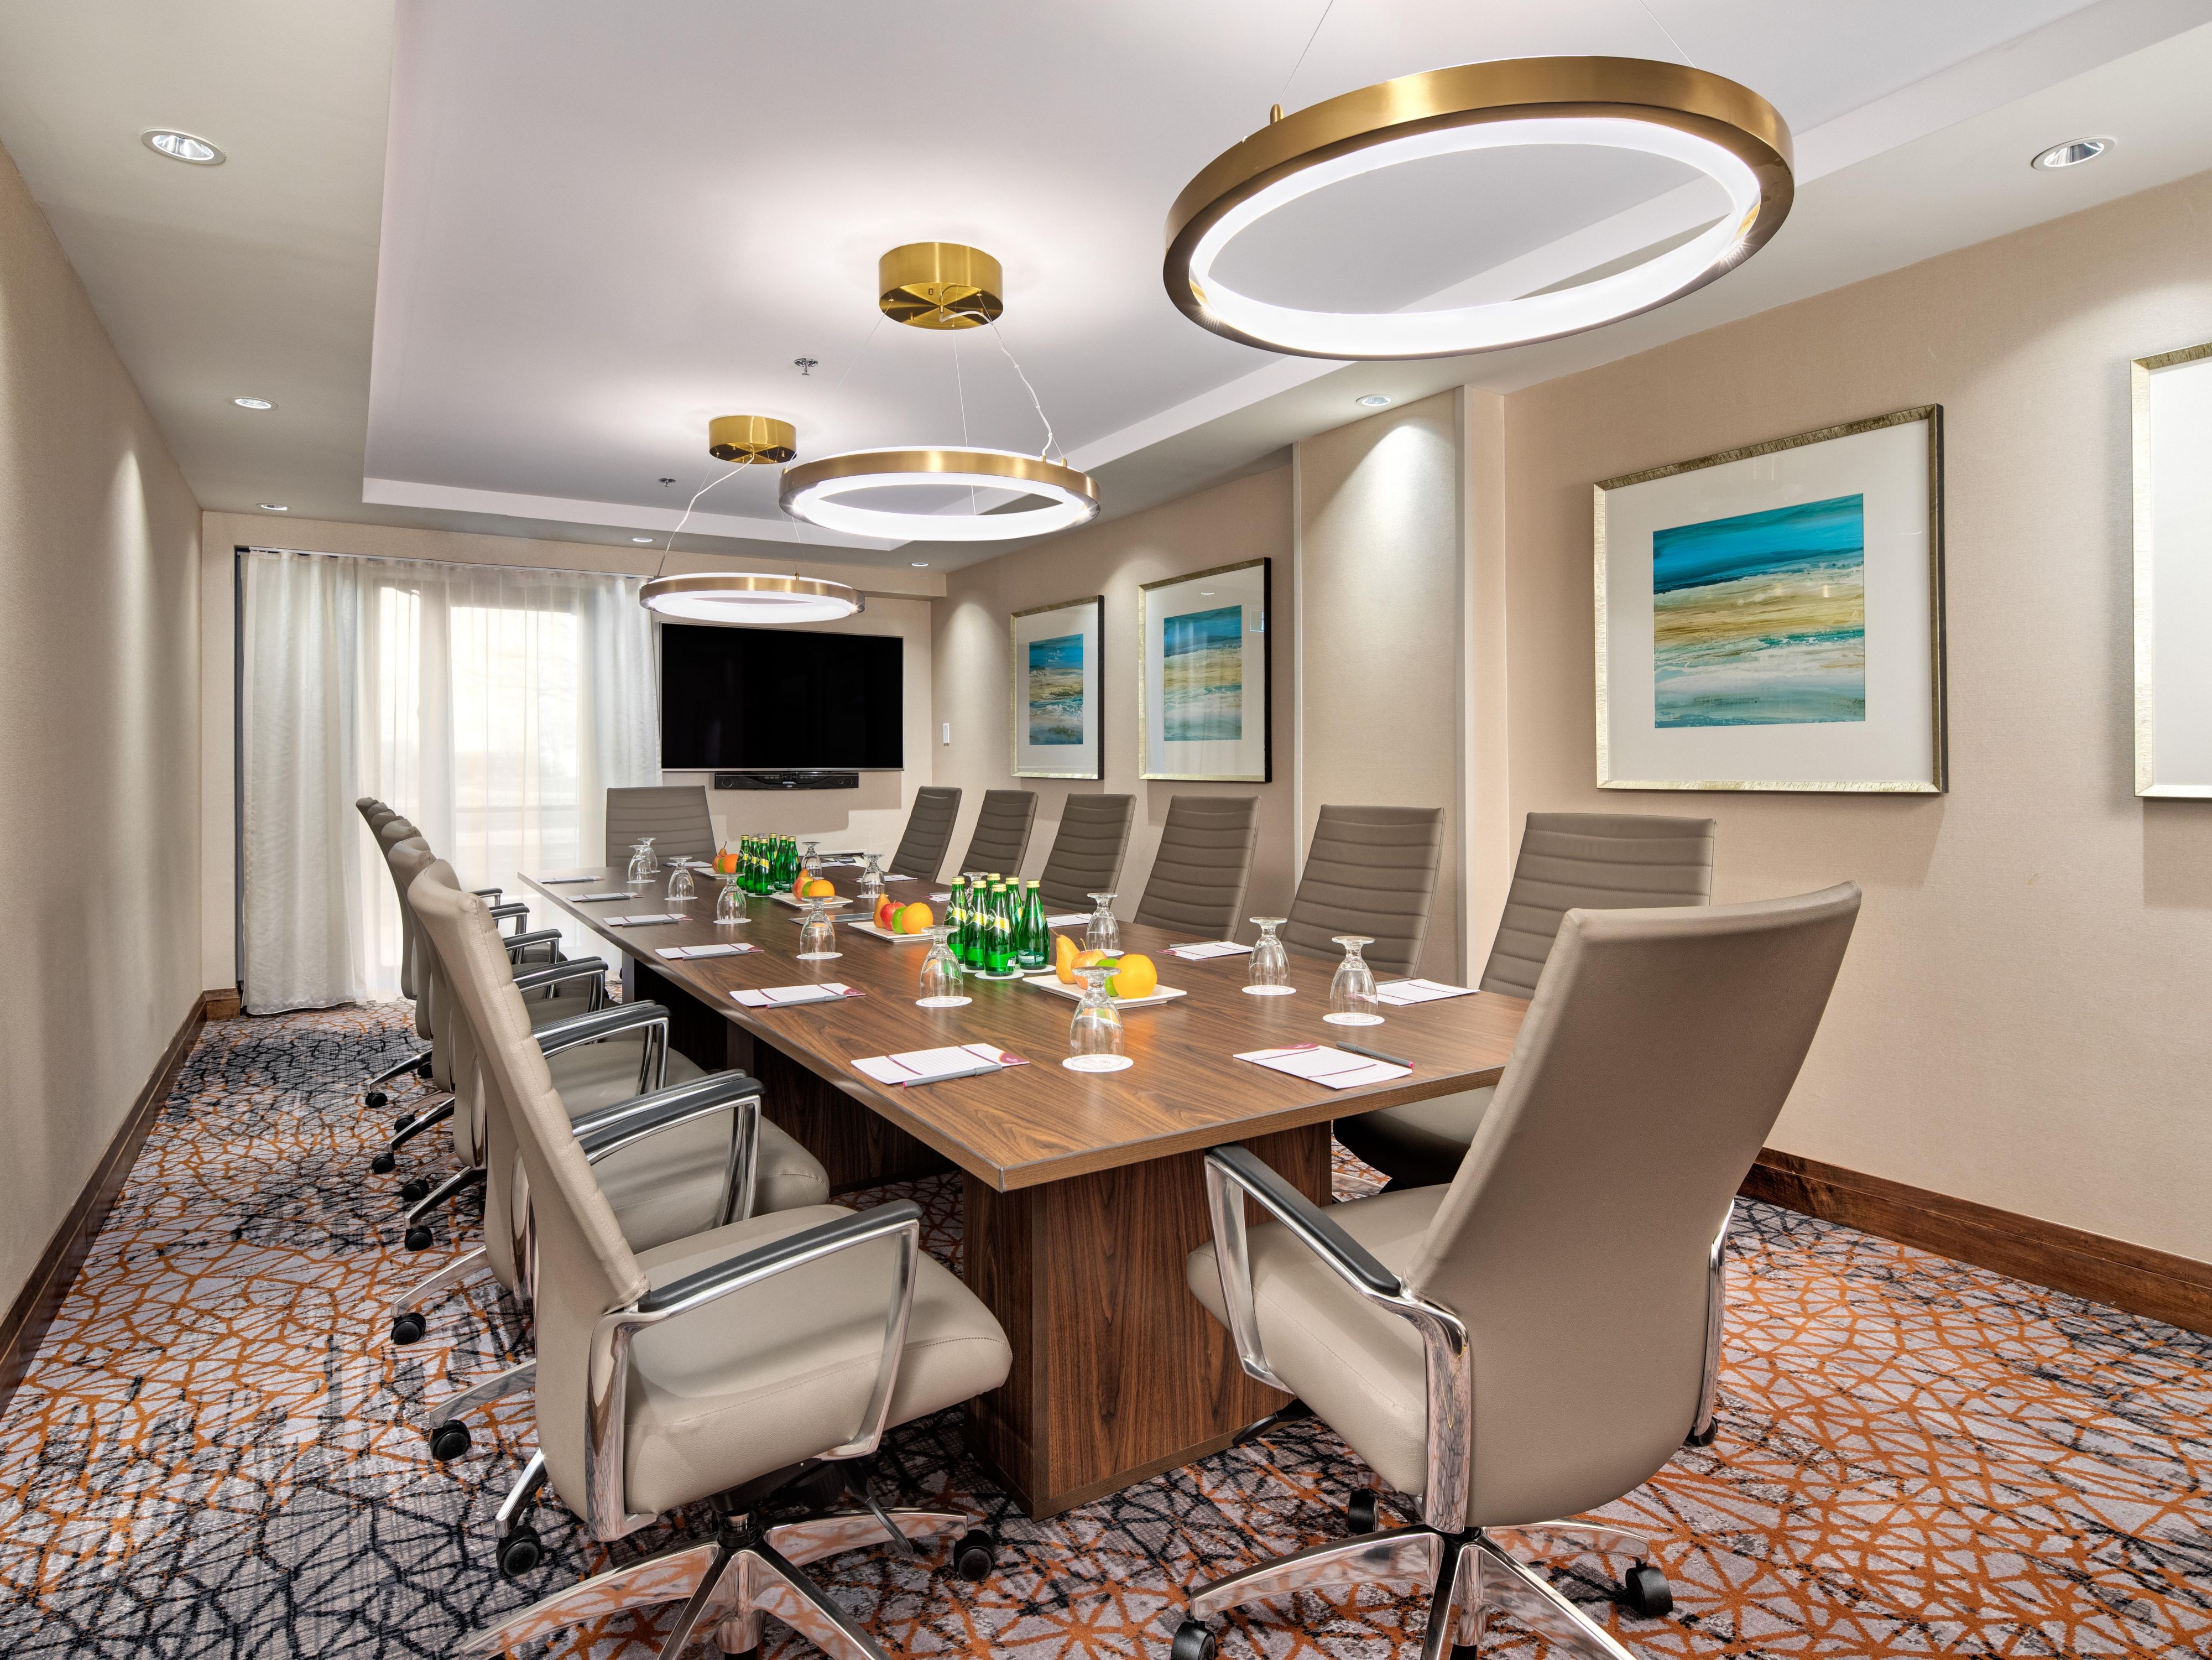 With 12,000 square feet of space, our hotel's newly renovated meeting area is great for any event type, from business meetings to conferences to weddings. All rooms are outfitted with advanced audiovisual technology and our Crowne Plaza Meeting Director will help you choose the best layout and catering options for your event.